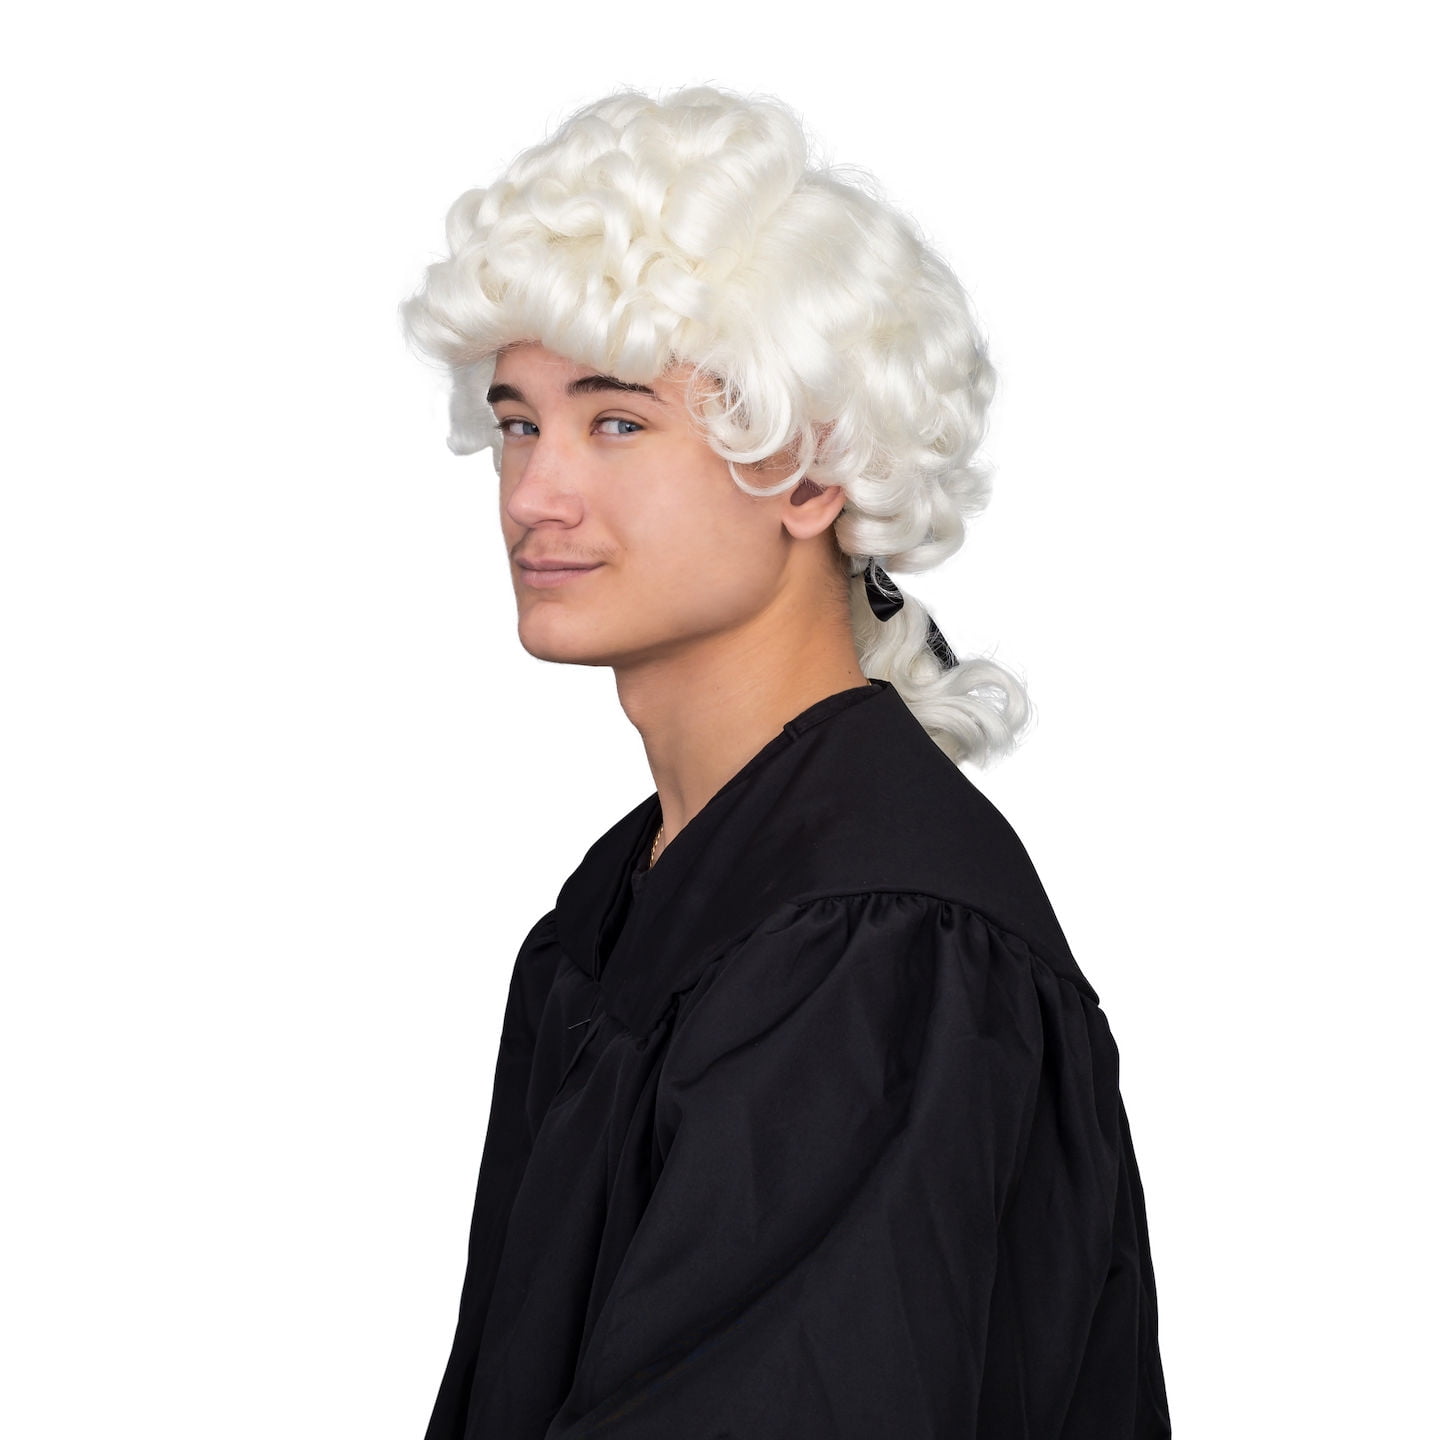 Colonial Man Wig Powder Fancy Dress Up Halloween Costume Accessory 3 COLORS 